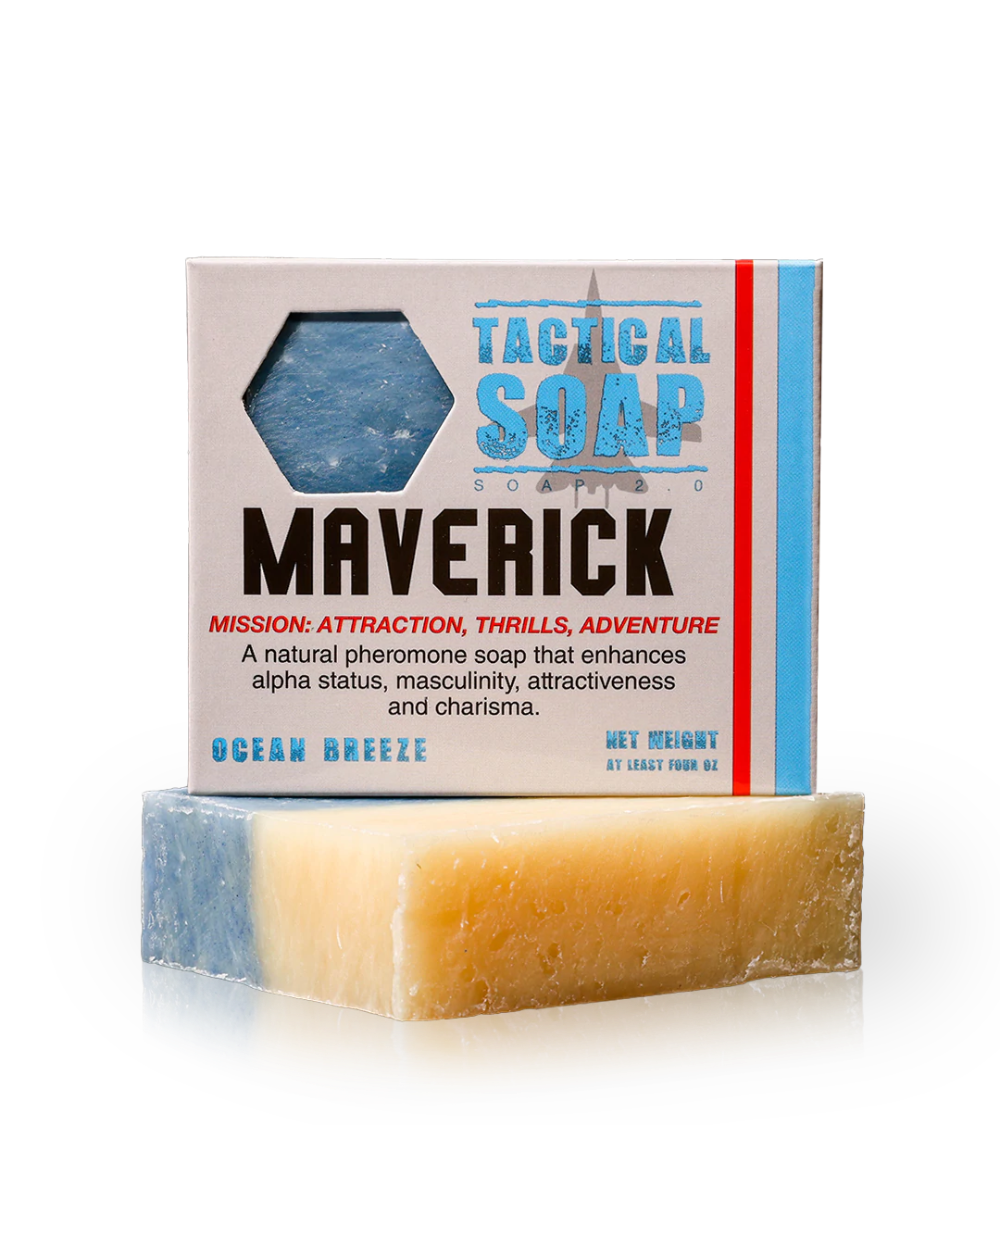 Tactical Soap All Natural (pheromone infused)